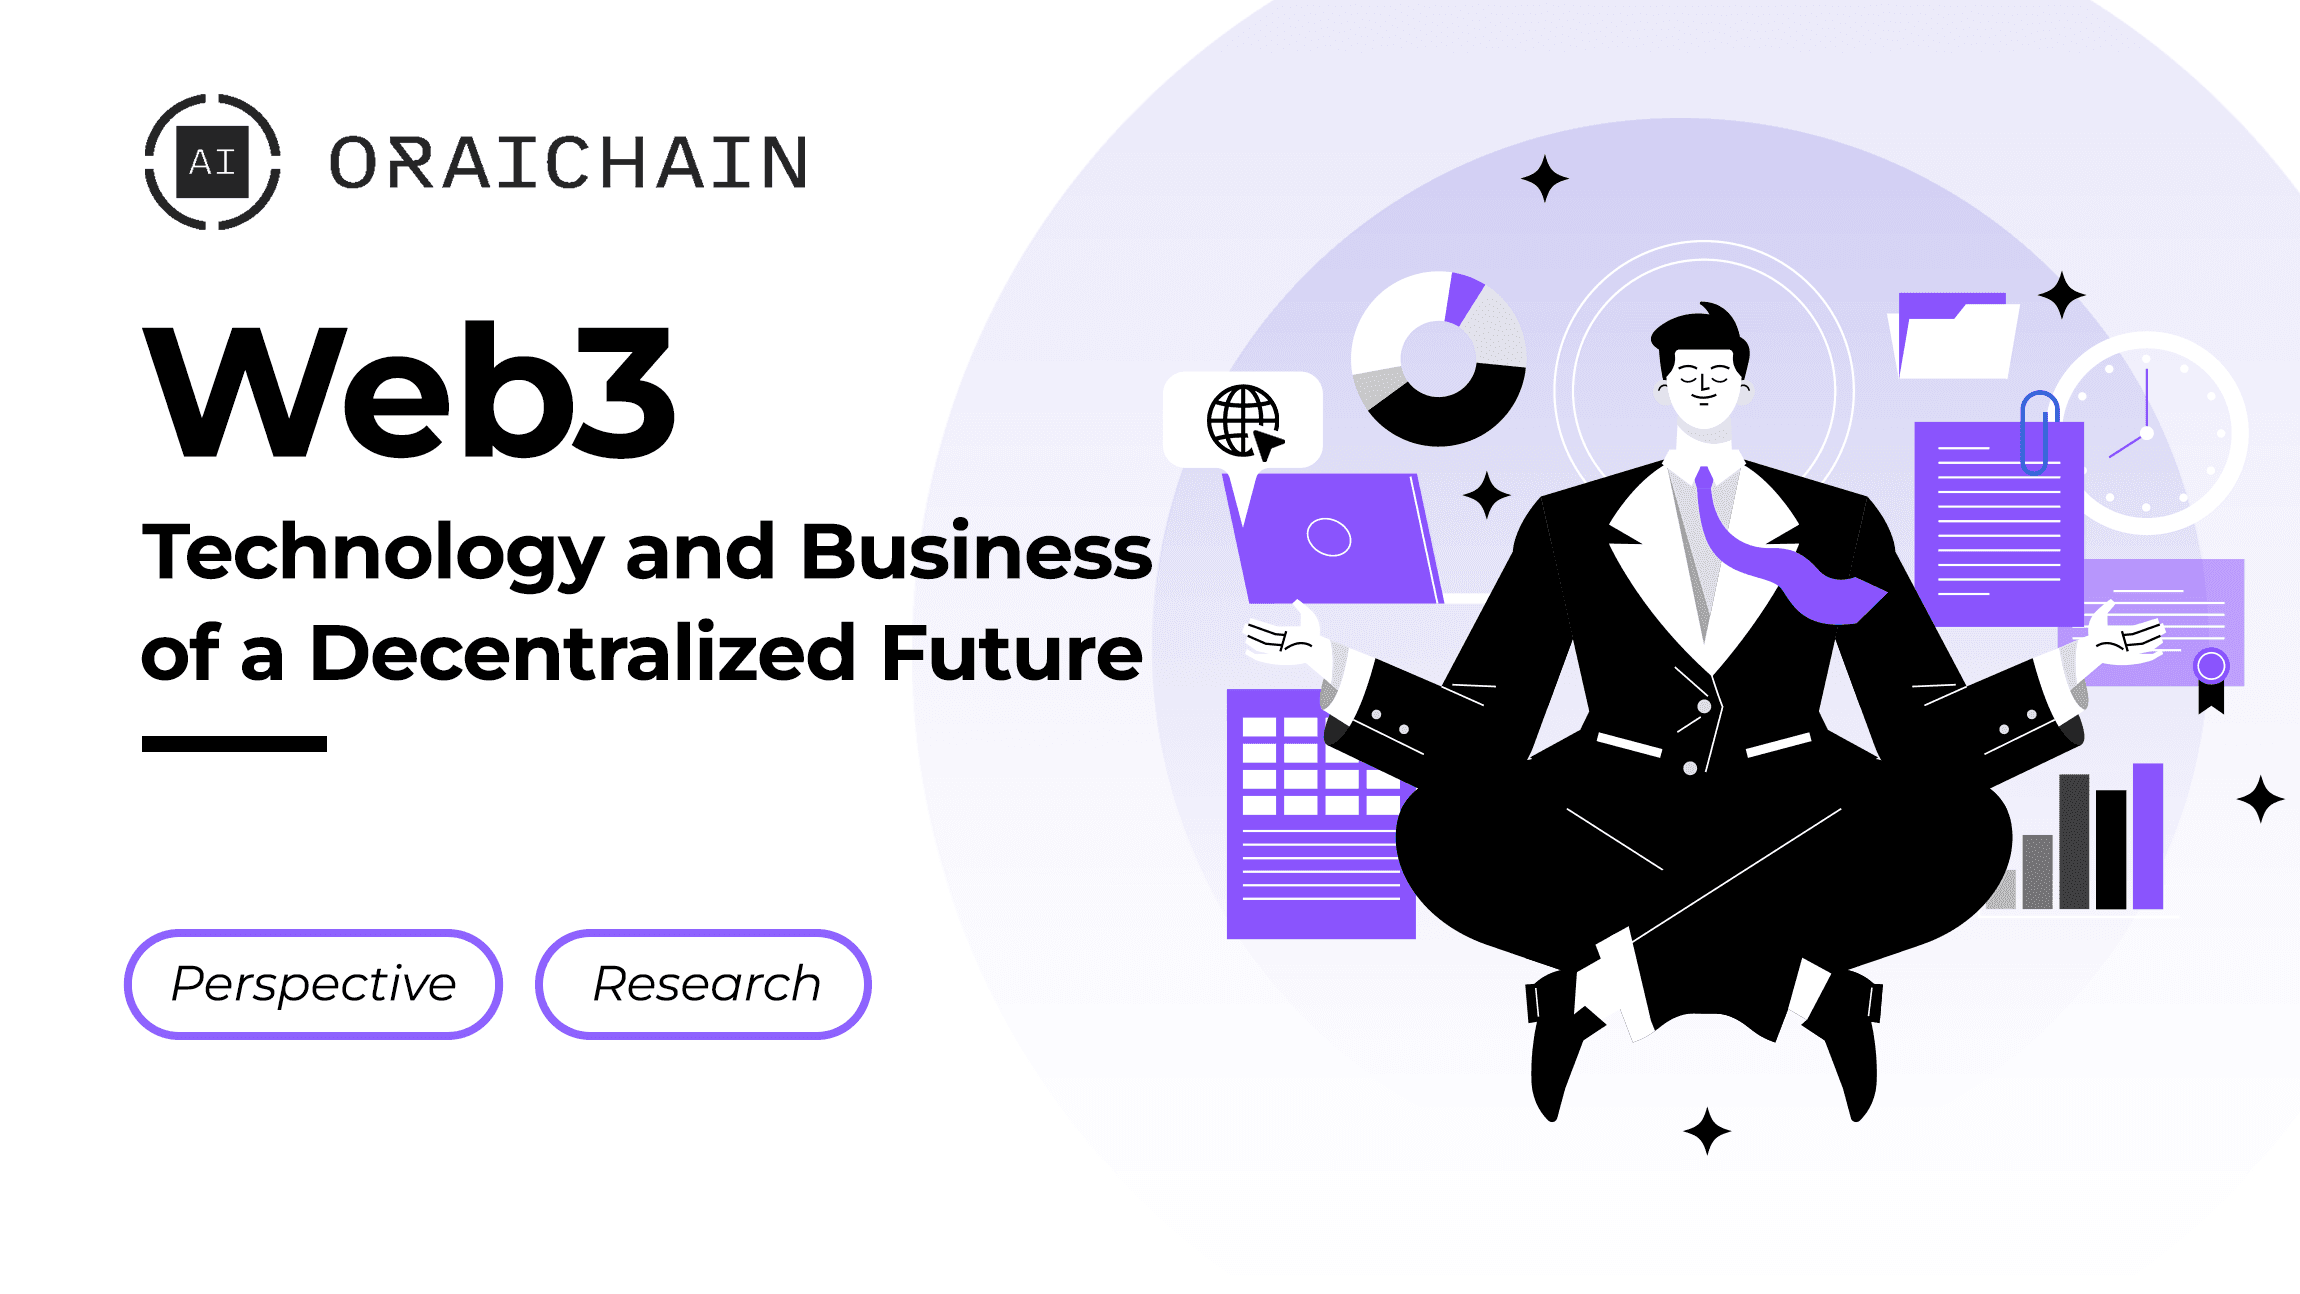 Web3 - Technology and Business of a Decentralized Future